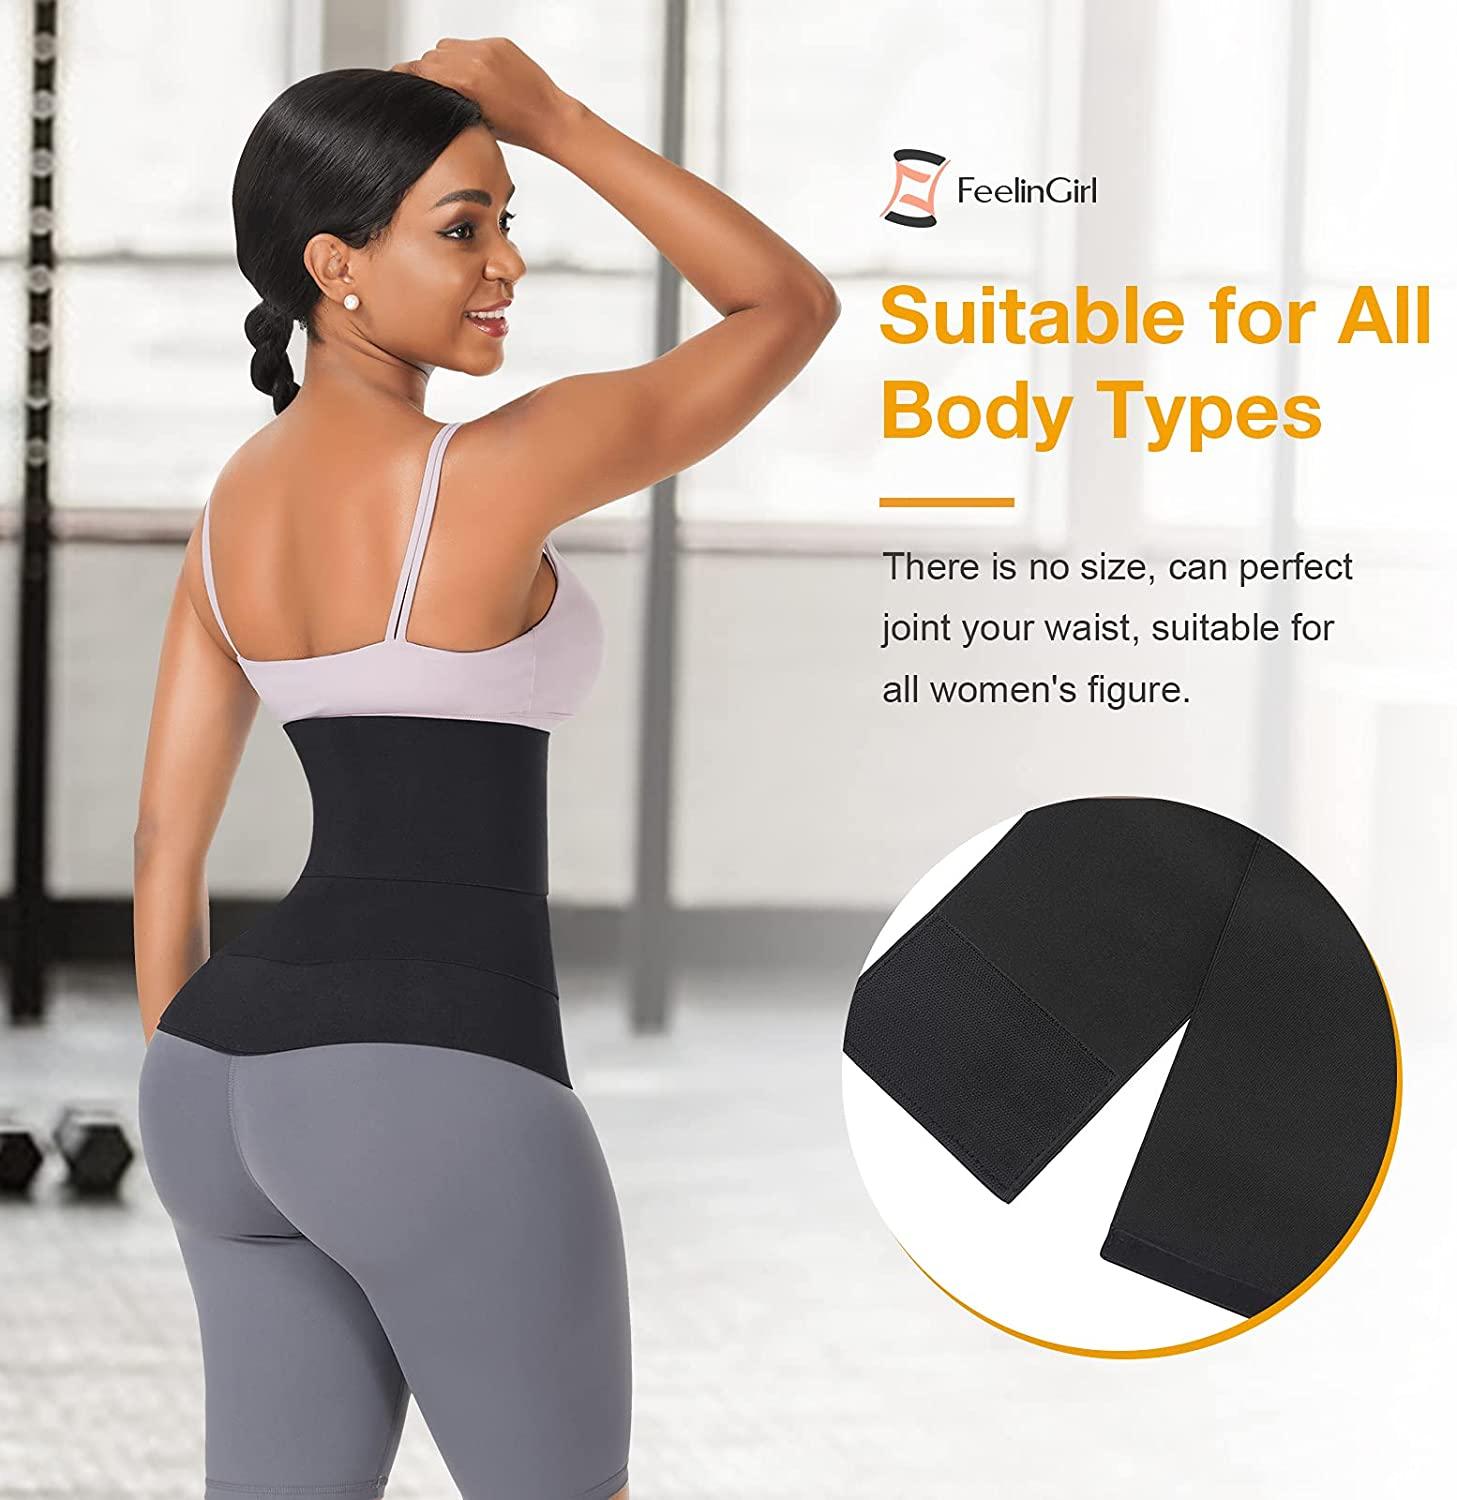 Get A Slimmer Waist Without A Waist Trainer - Femme Fitale Fit